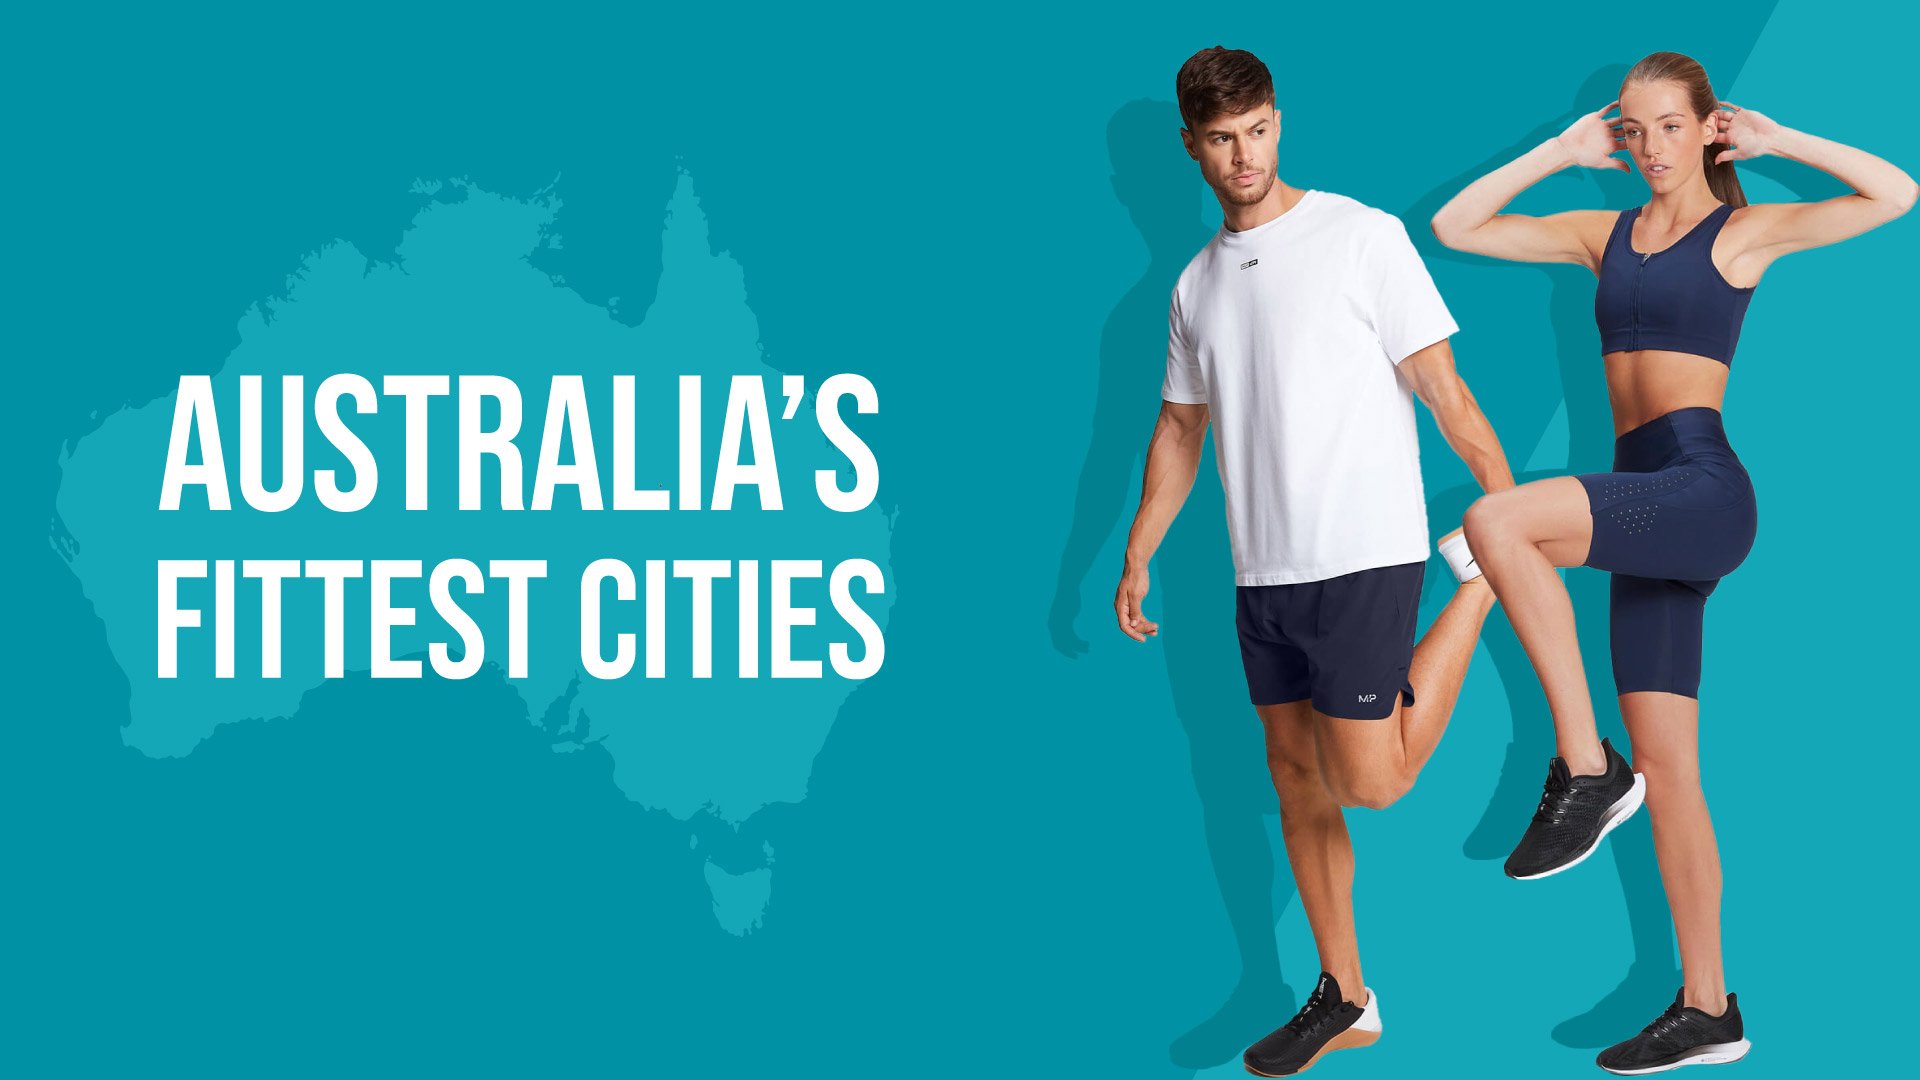 The Fittest Cities in Australia